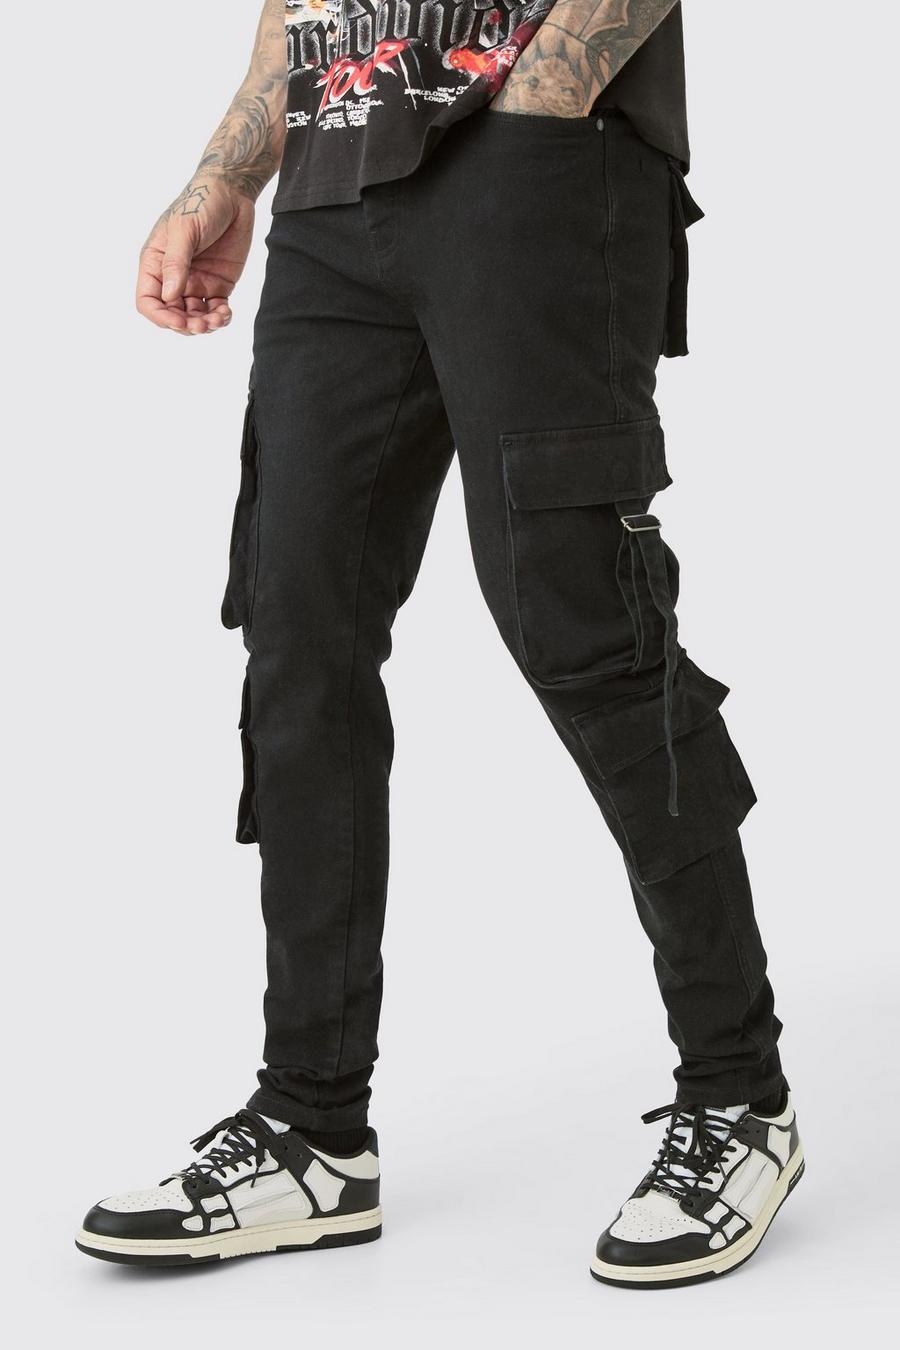 Black slim fit jeans from